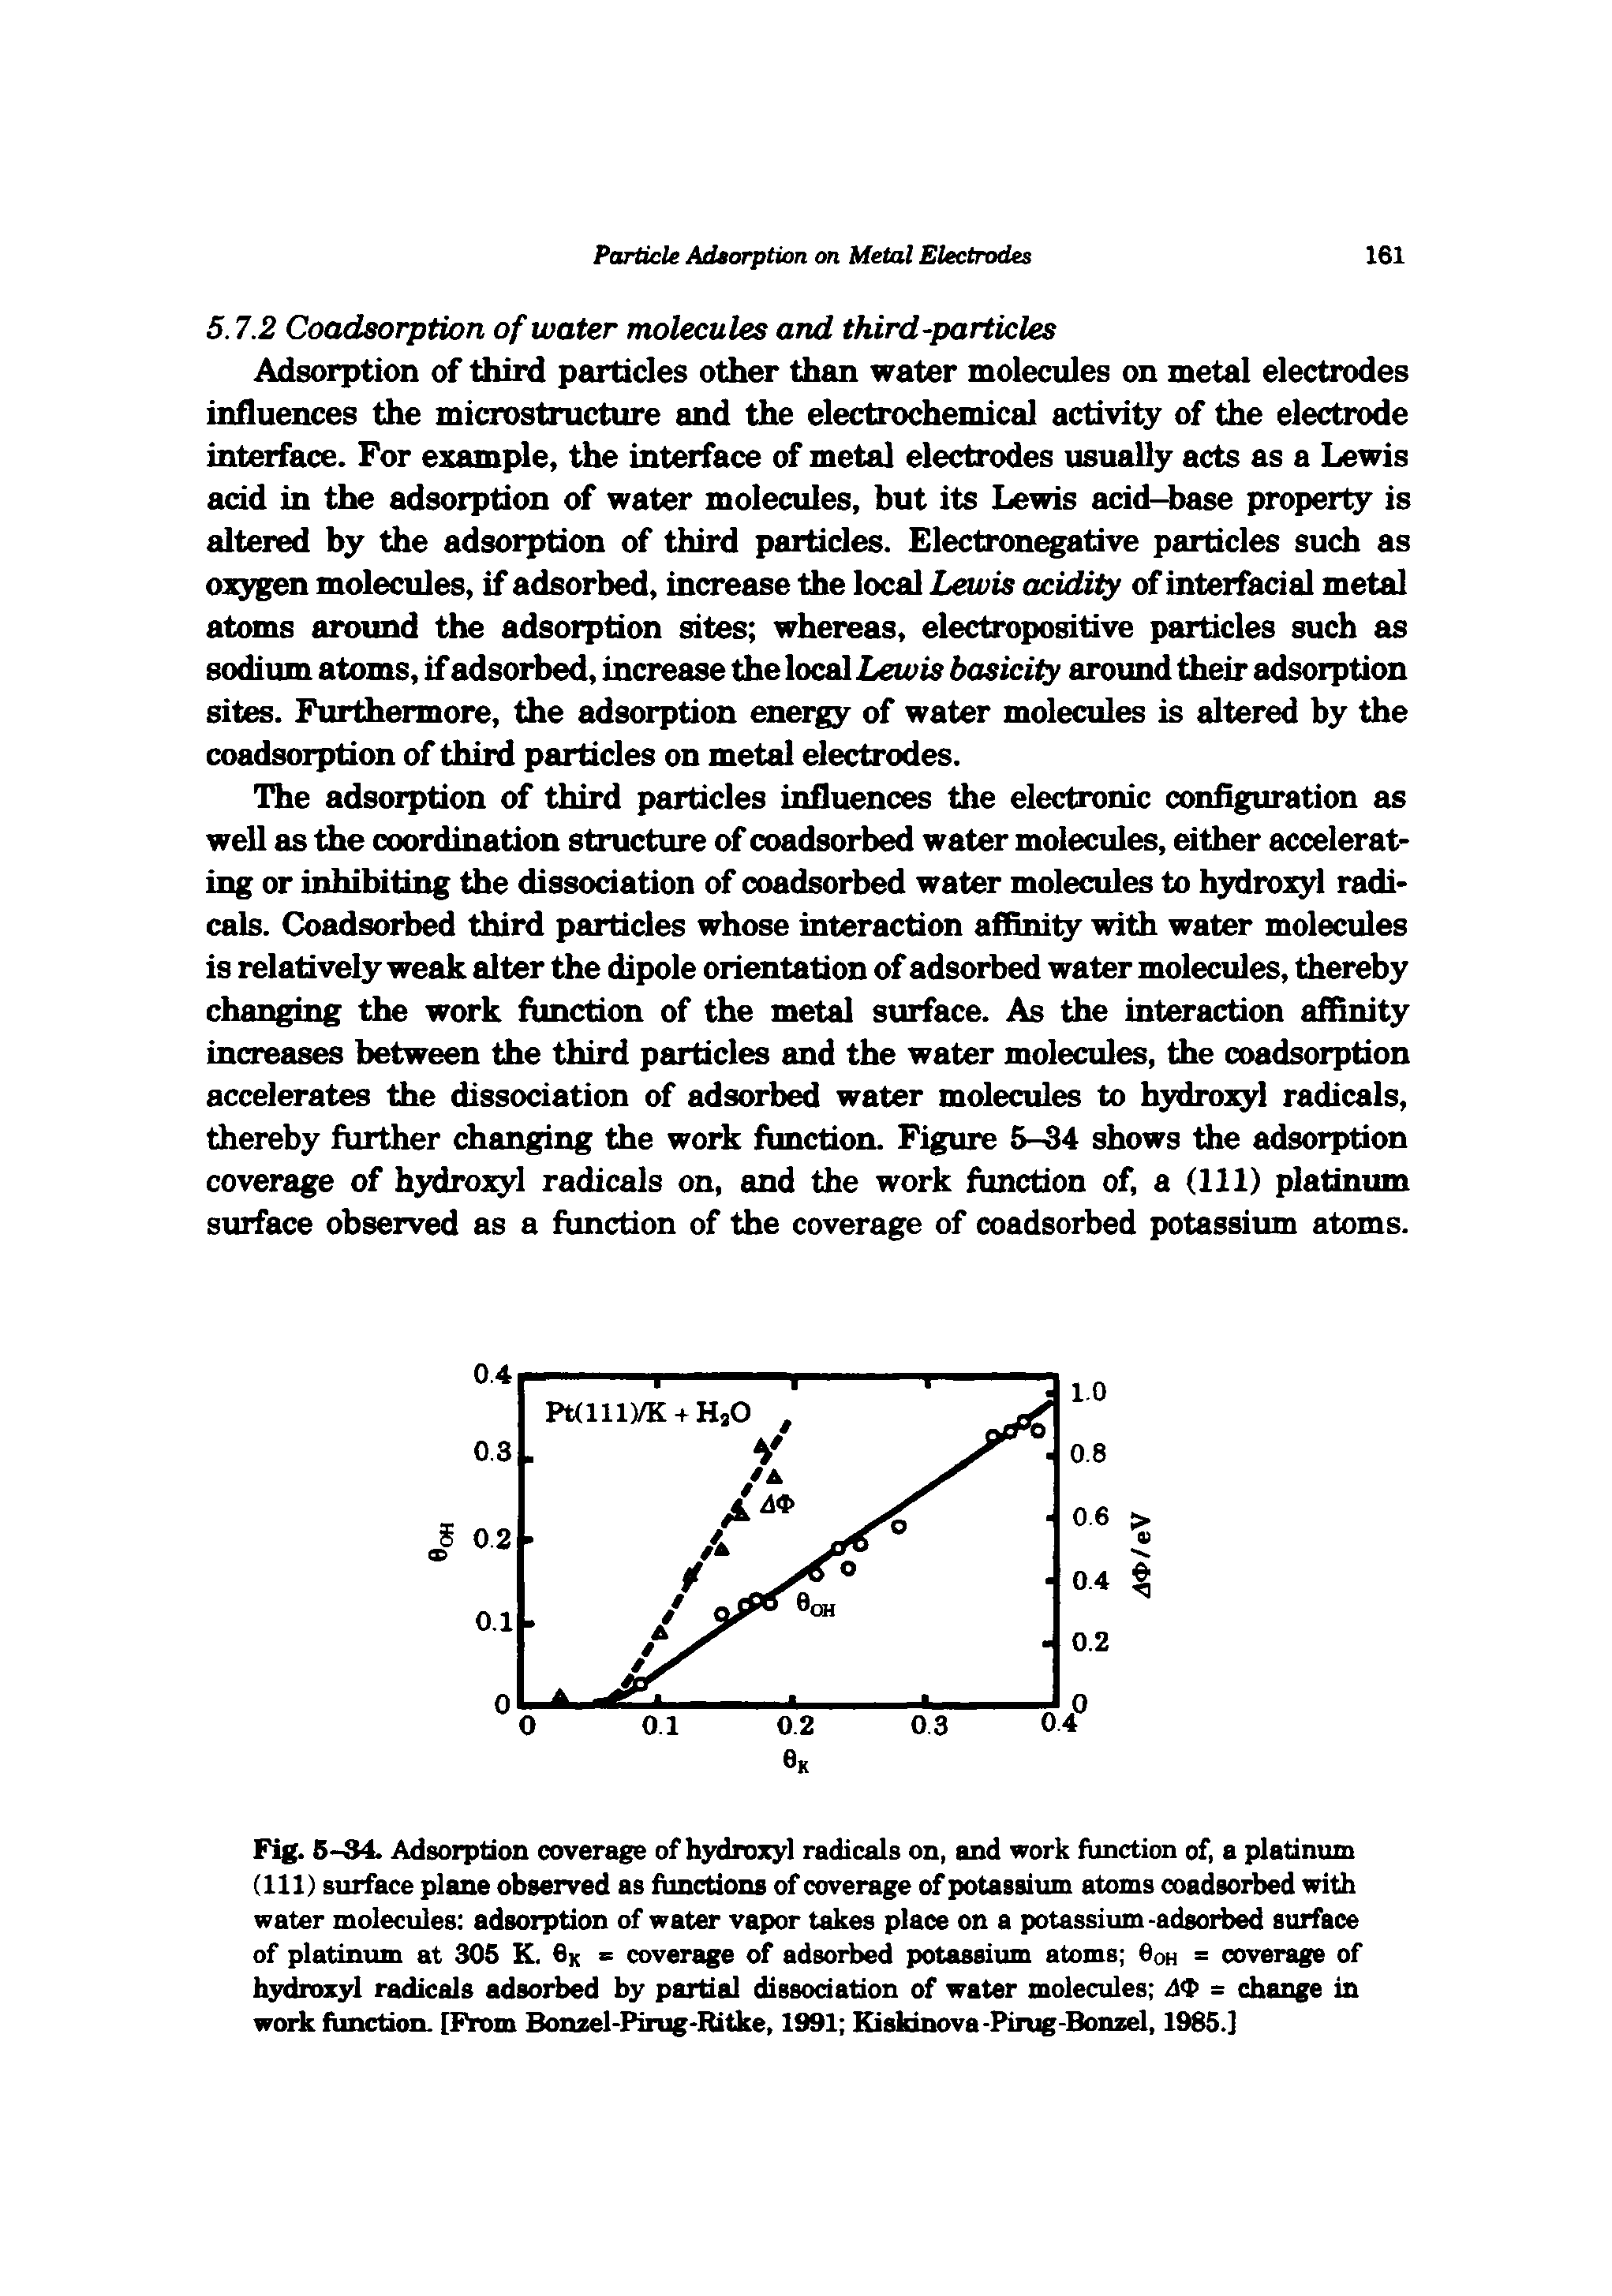 Fig. 6-34. Adsorption coverage of hydroxyl radicals on, and work function of, a platinum (111) surface plane observed as functions of coverage of potassium atoms coadsorbed with water molecules adsorption of water vapor takes place on a potassium-adsorbed surface of platimun at 305 K. 6k = coverage of adsorbed potassium atoms 6oh = coverage of hydroxyl radicals adsorbed by partial dissociation of water molecules A<P = change in work function. [From Bonzel-Pirug-Ritke, 1991 Kiskinova-Pirug-Bonzel, 1985.]...